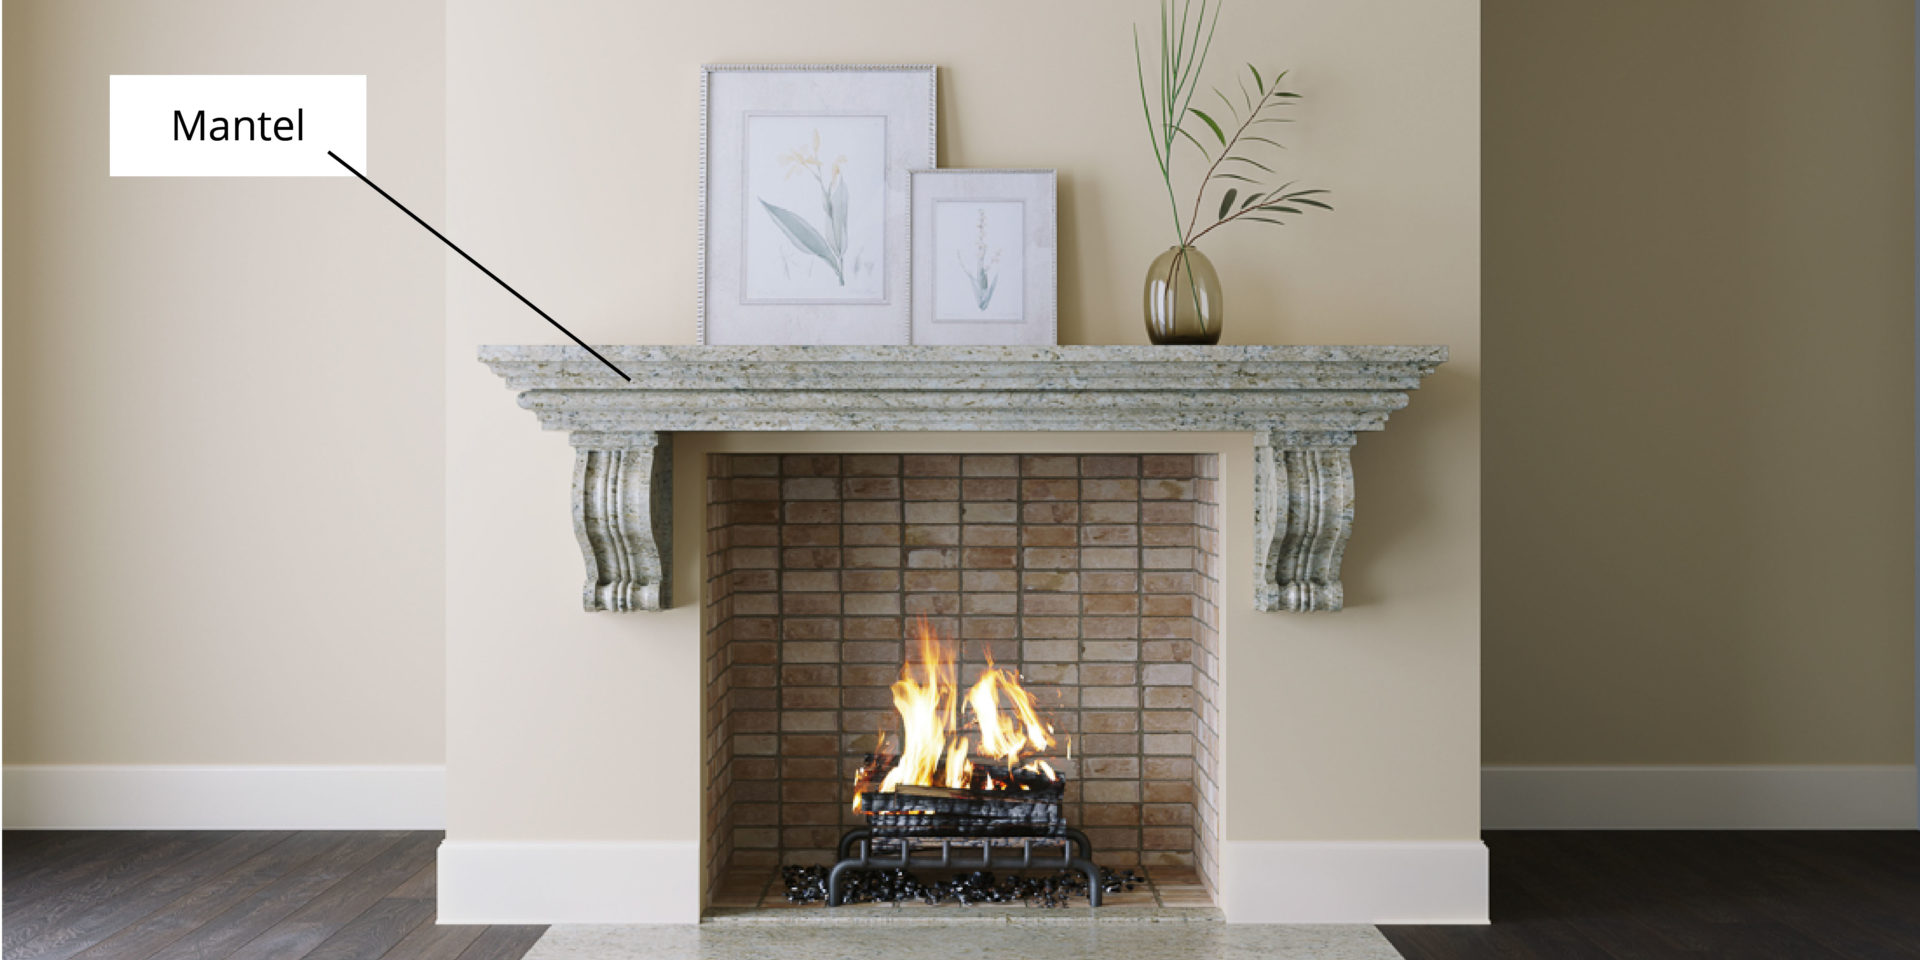 Fireplace Terms 101 The Ultimate Guide, What Is The Inside Of A Fireplace Called